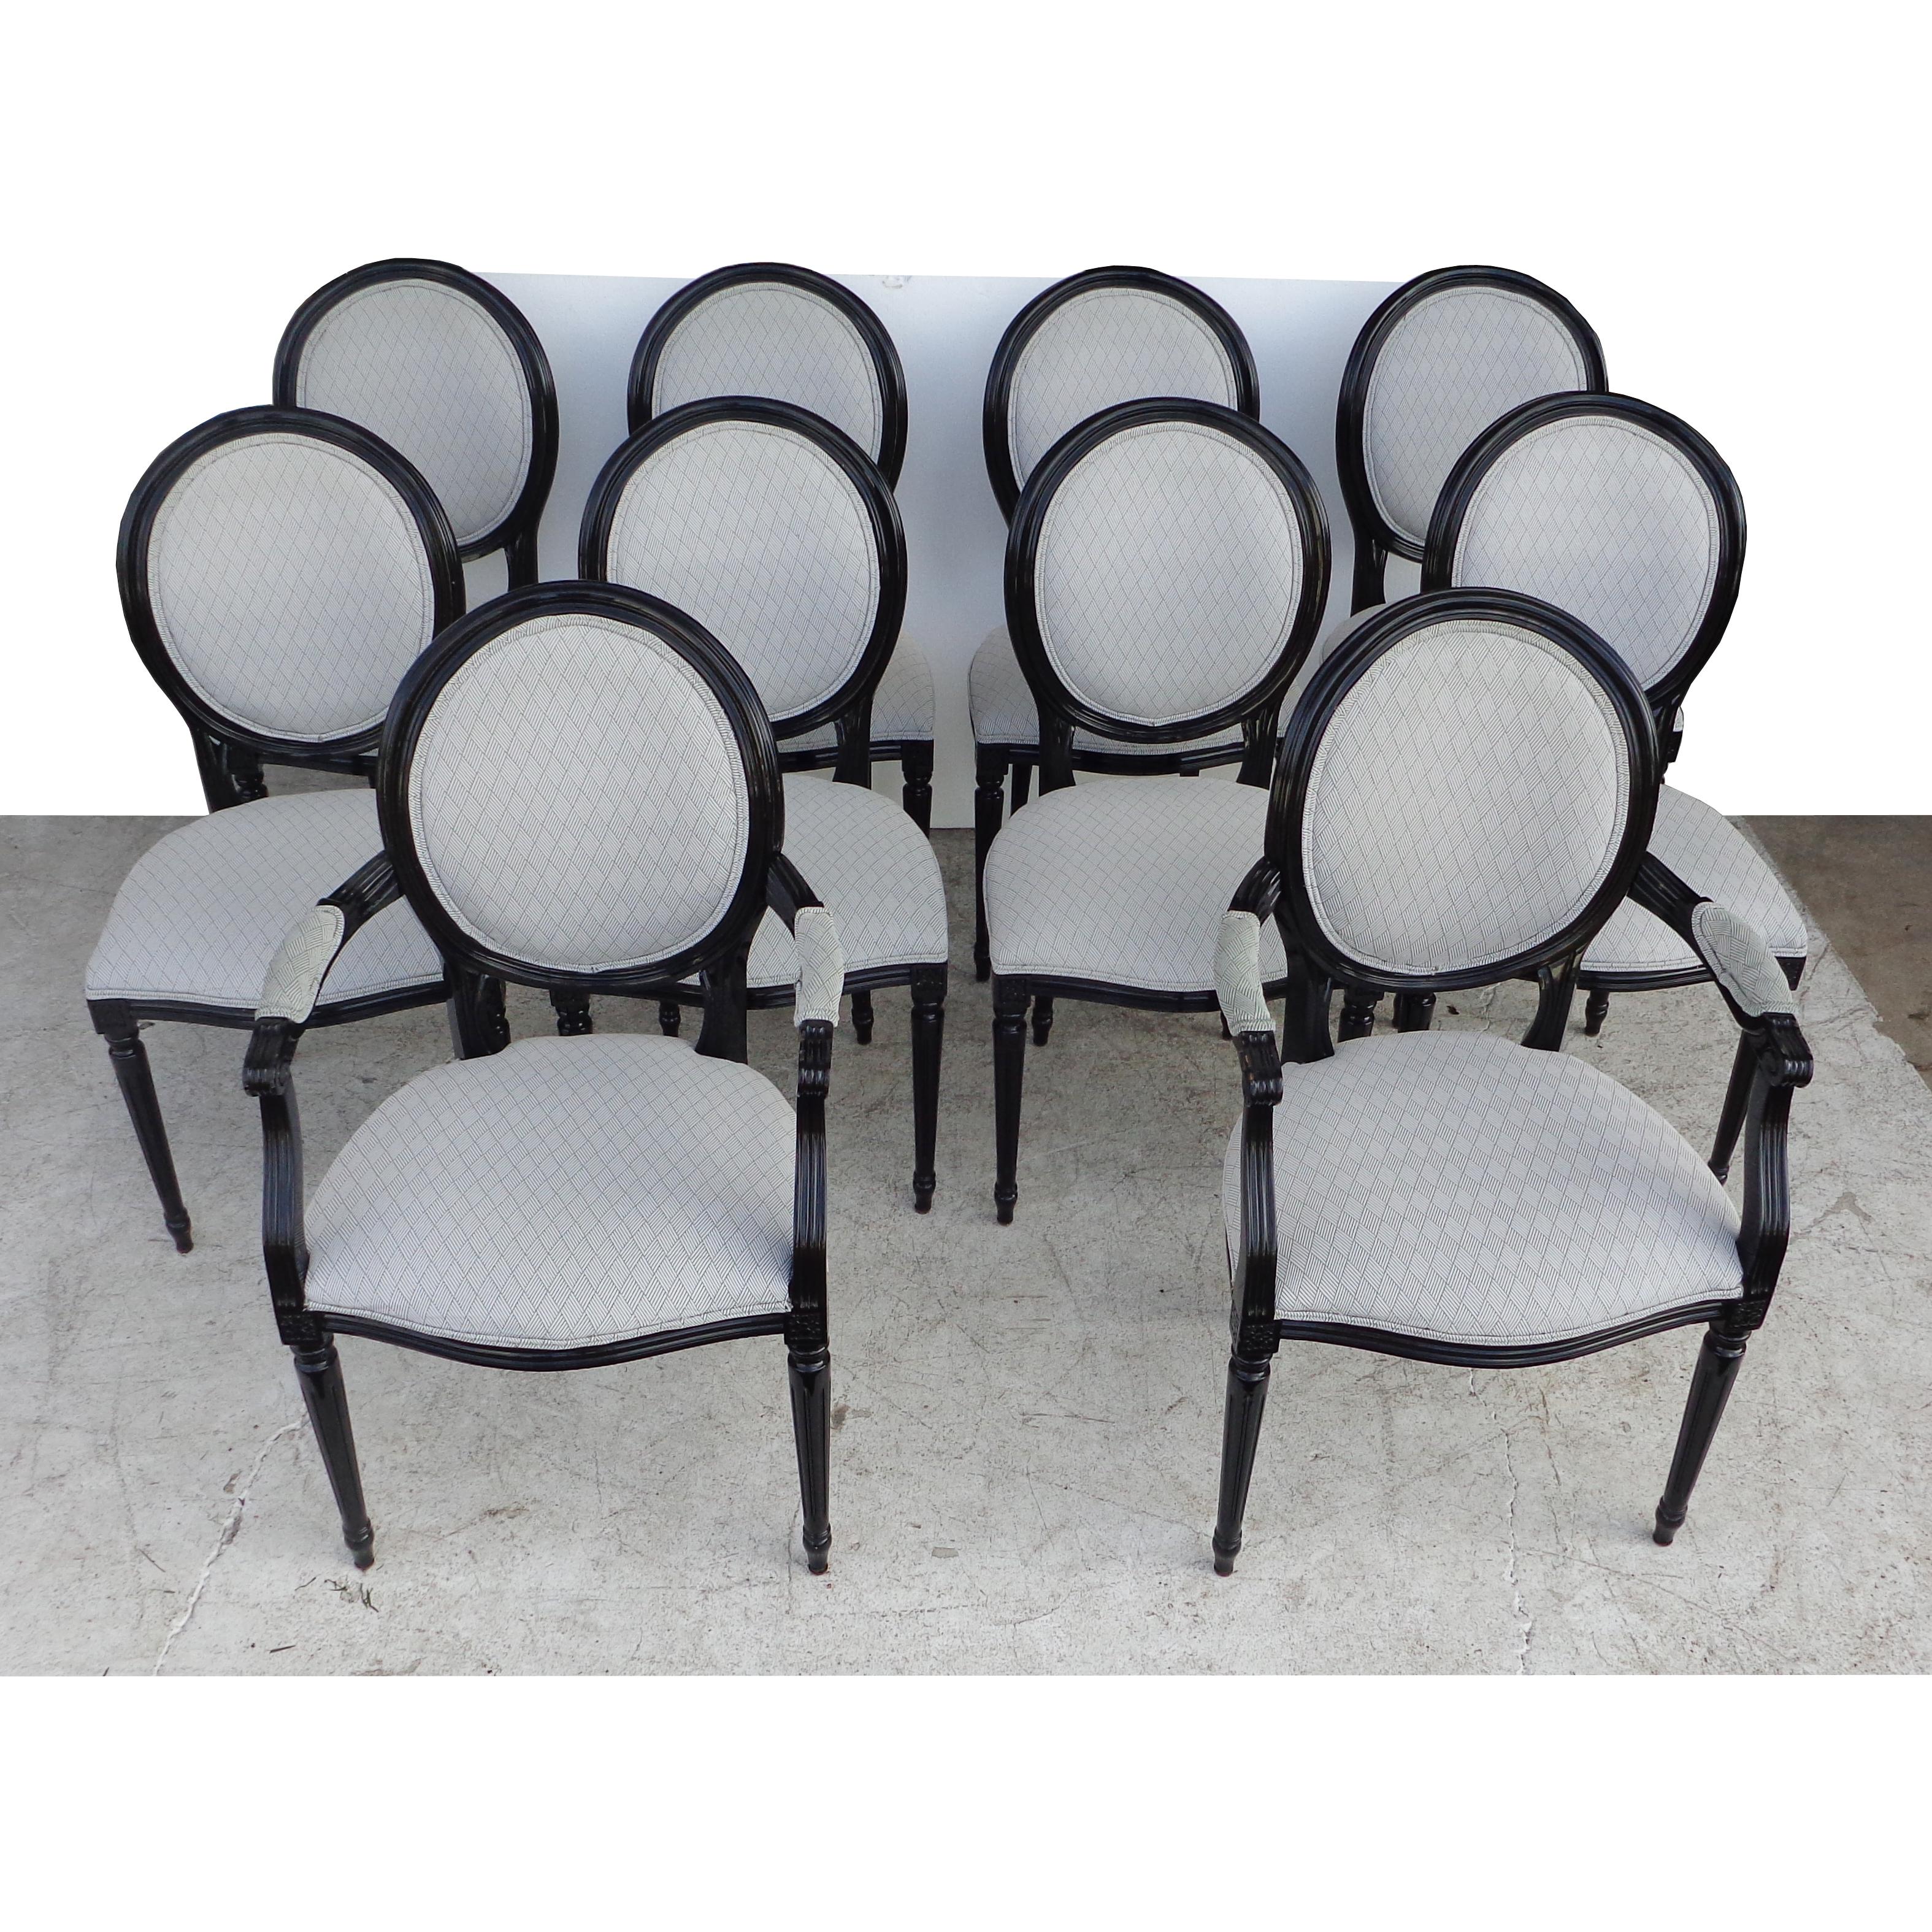 Ebonized Set of 10 Neoclassical Louis XVI Style Dining Chairs